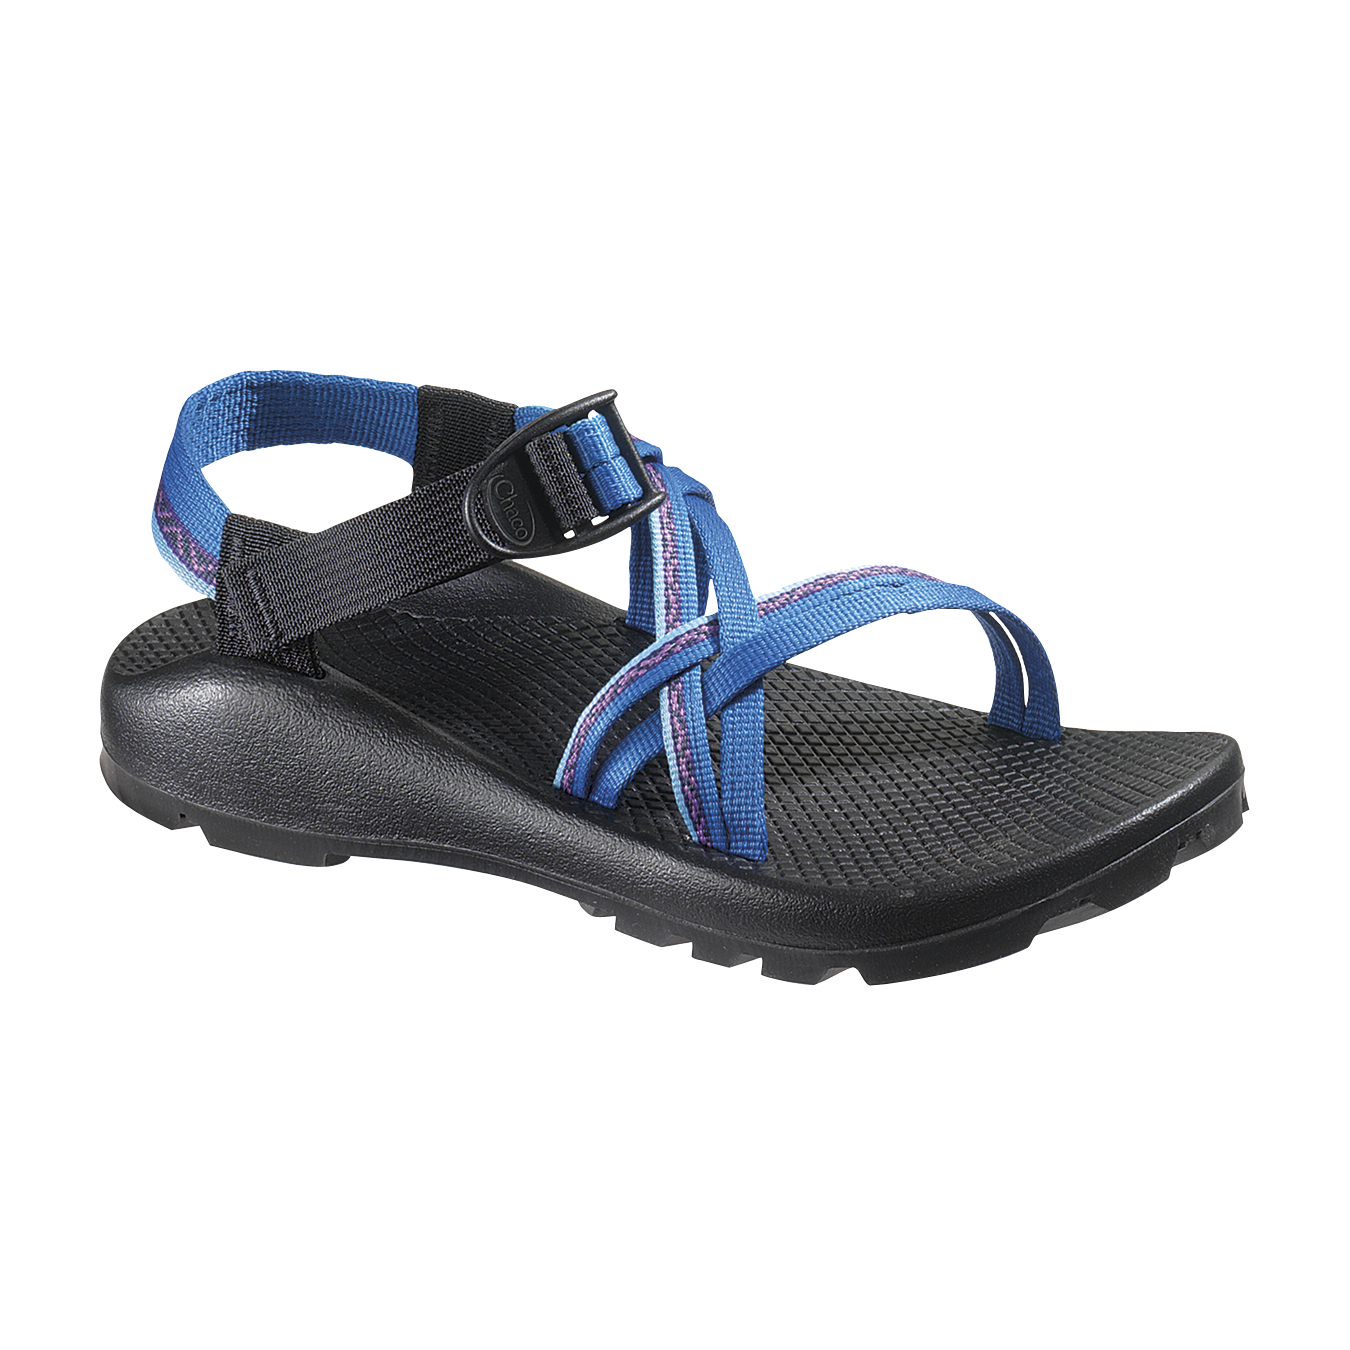 Classic Chacos